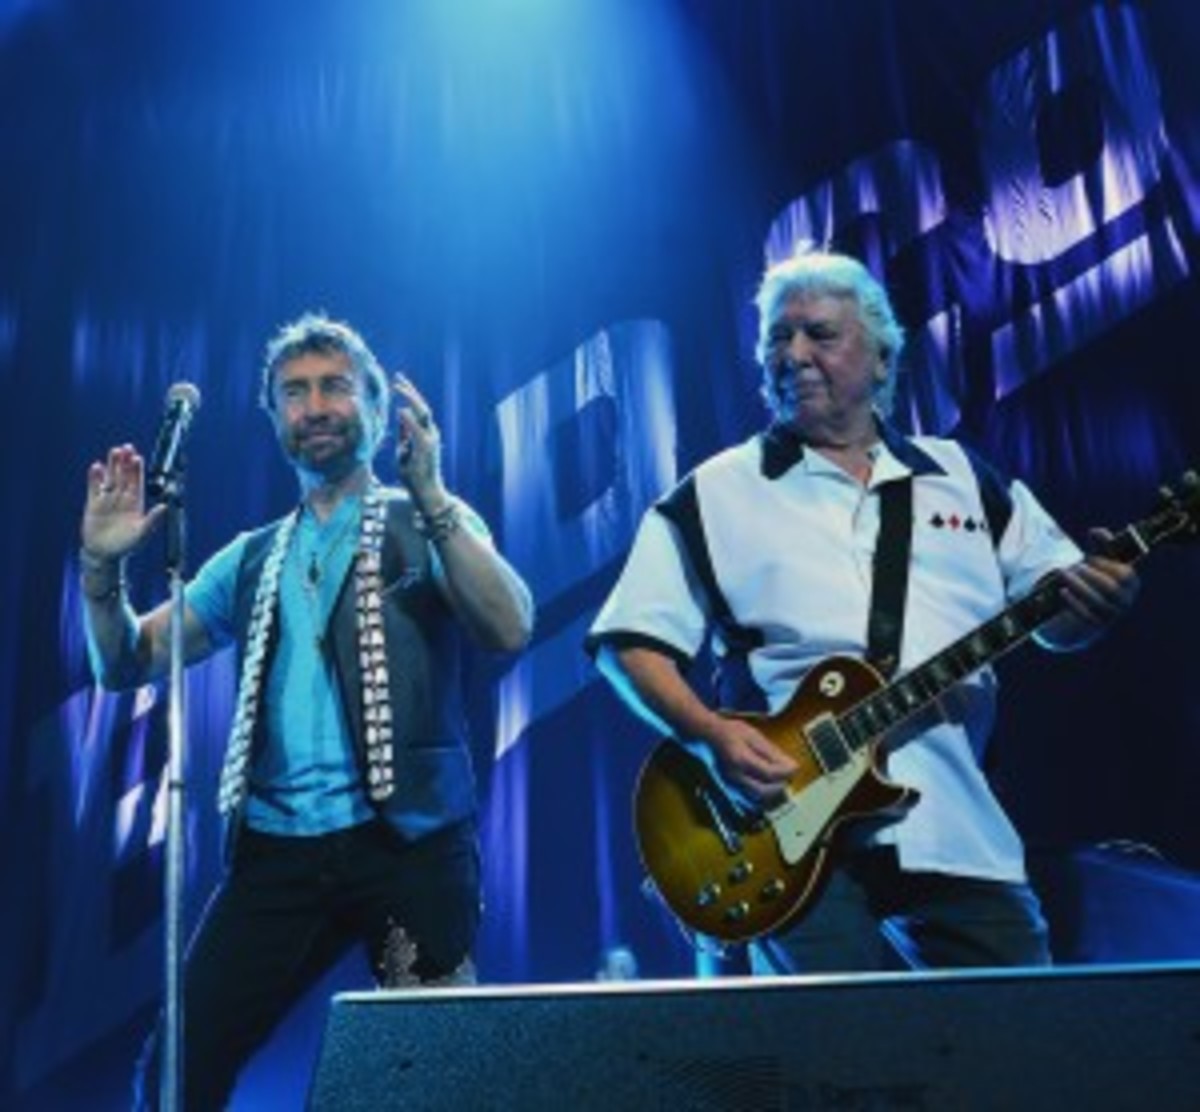 Paul Rodgers (left) and Mick Ralphs in action July 17 at the Susquehanna Bank Center in Camden, N.J. (Photo by Chris M. Junior)